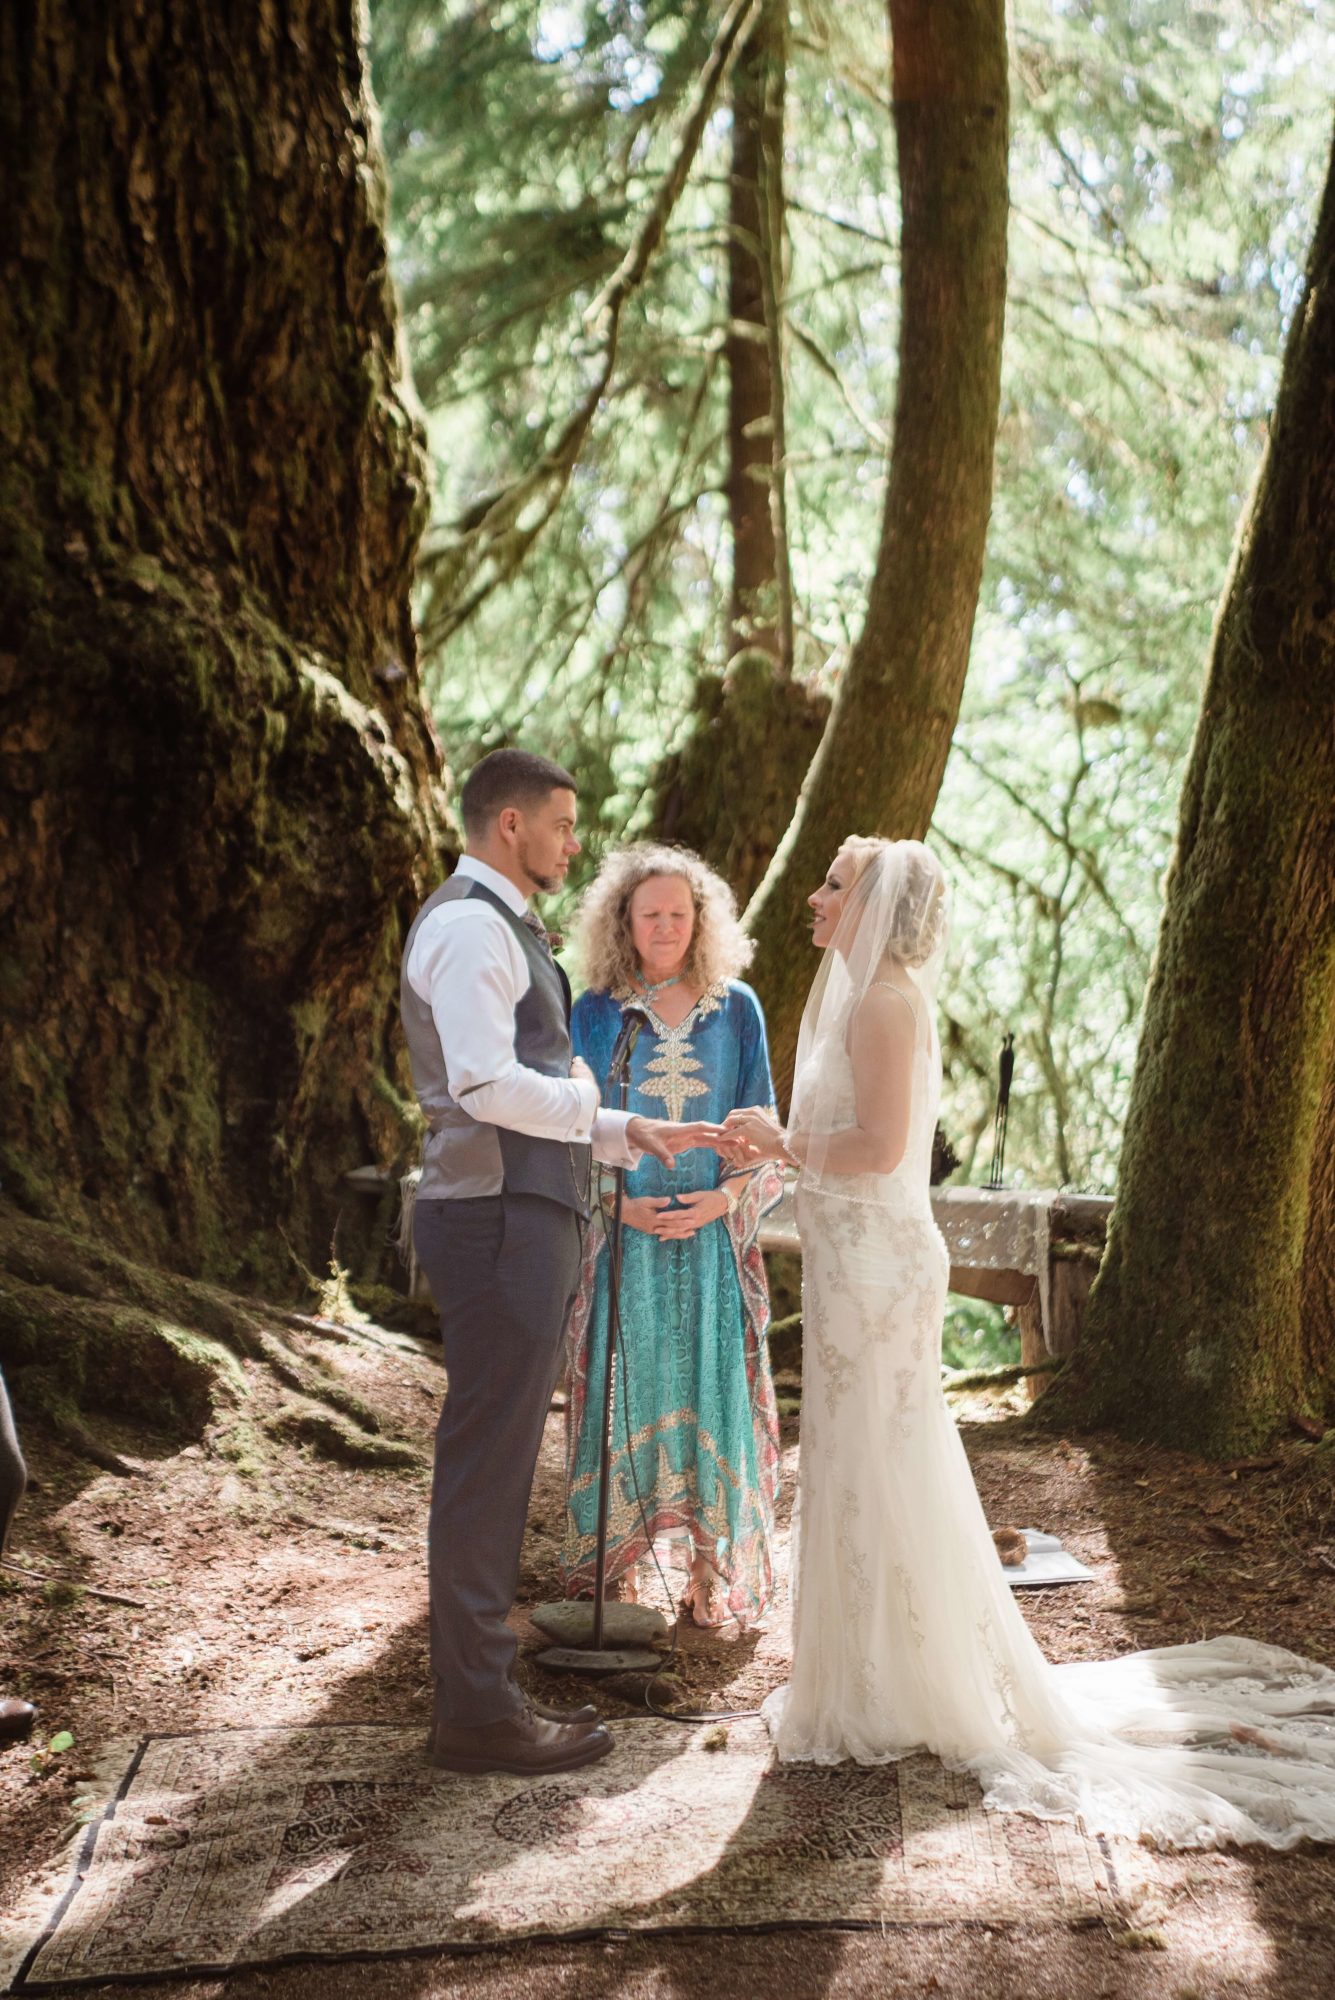 Wedding Ceremony in the Hoh Rainforest